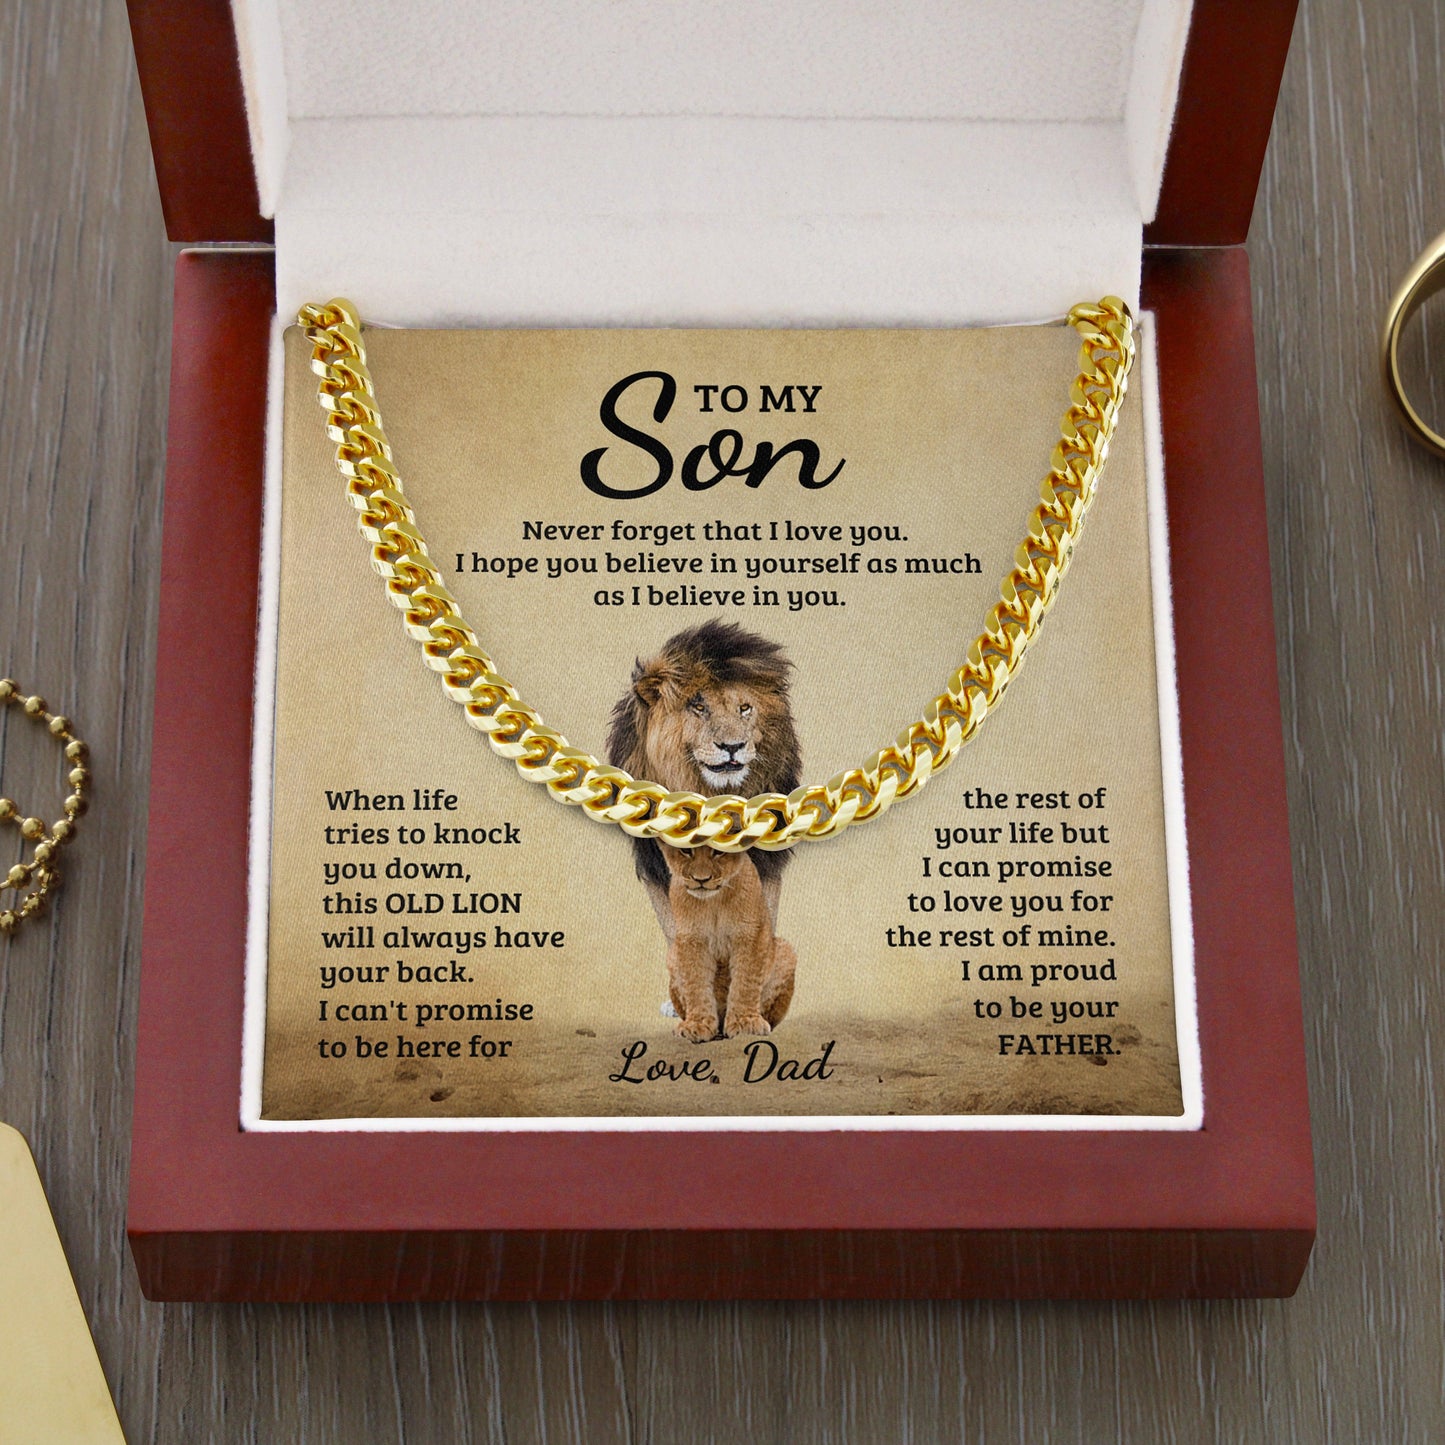 Jewelry gifts Son - Promise - Cuban Link Chain - Belesmé - Memorable Jewelry Gifts 